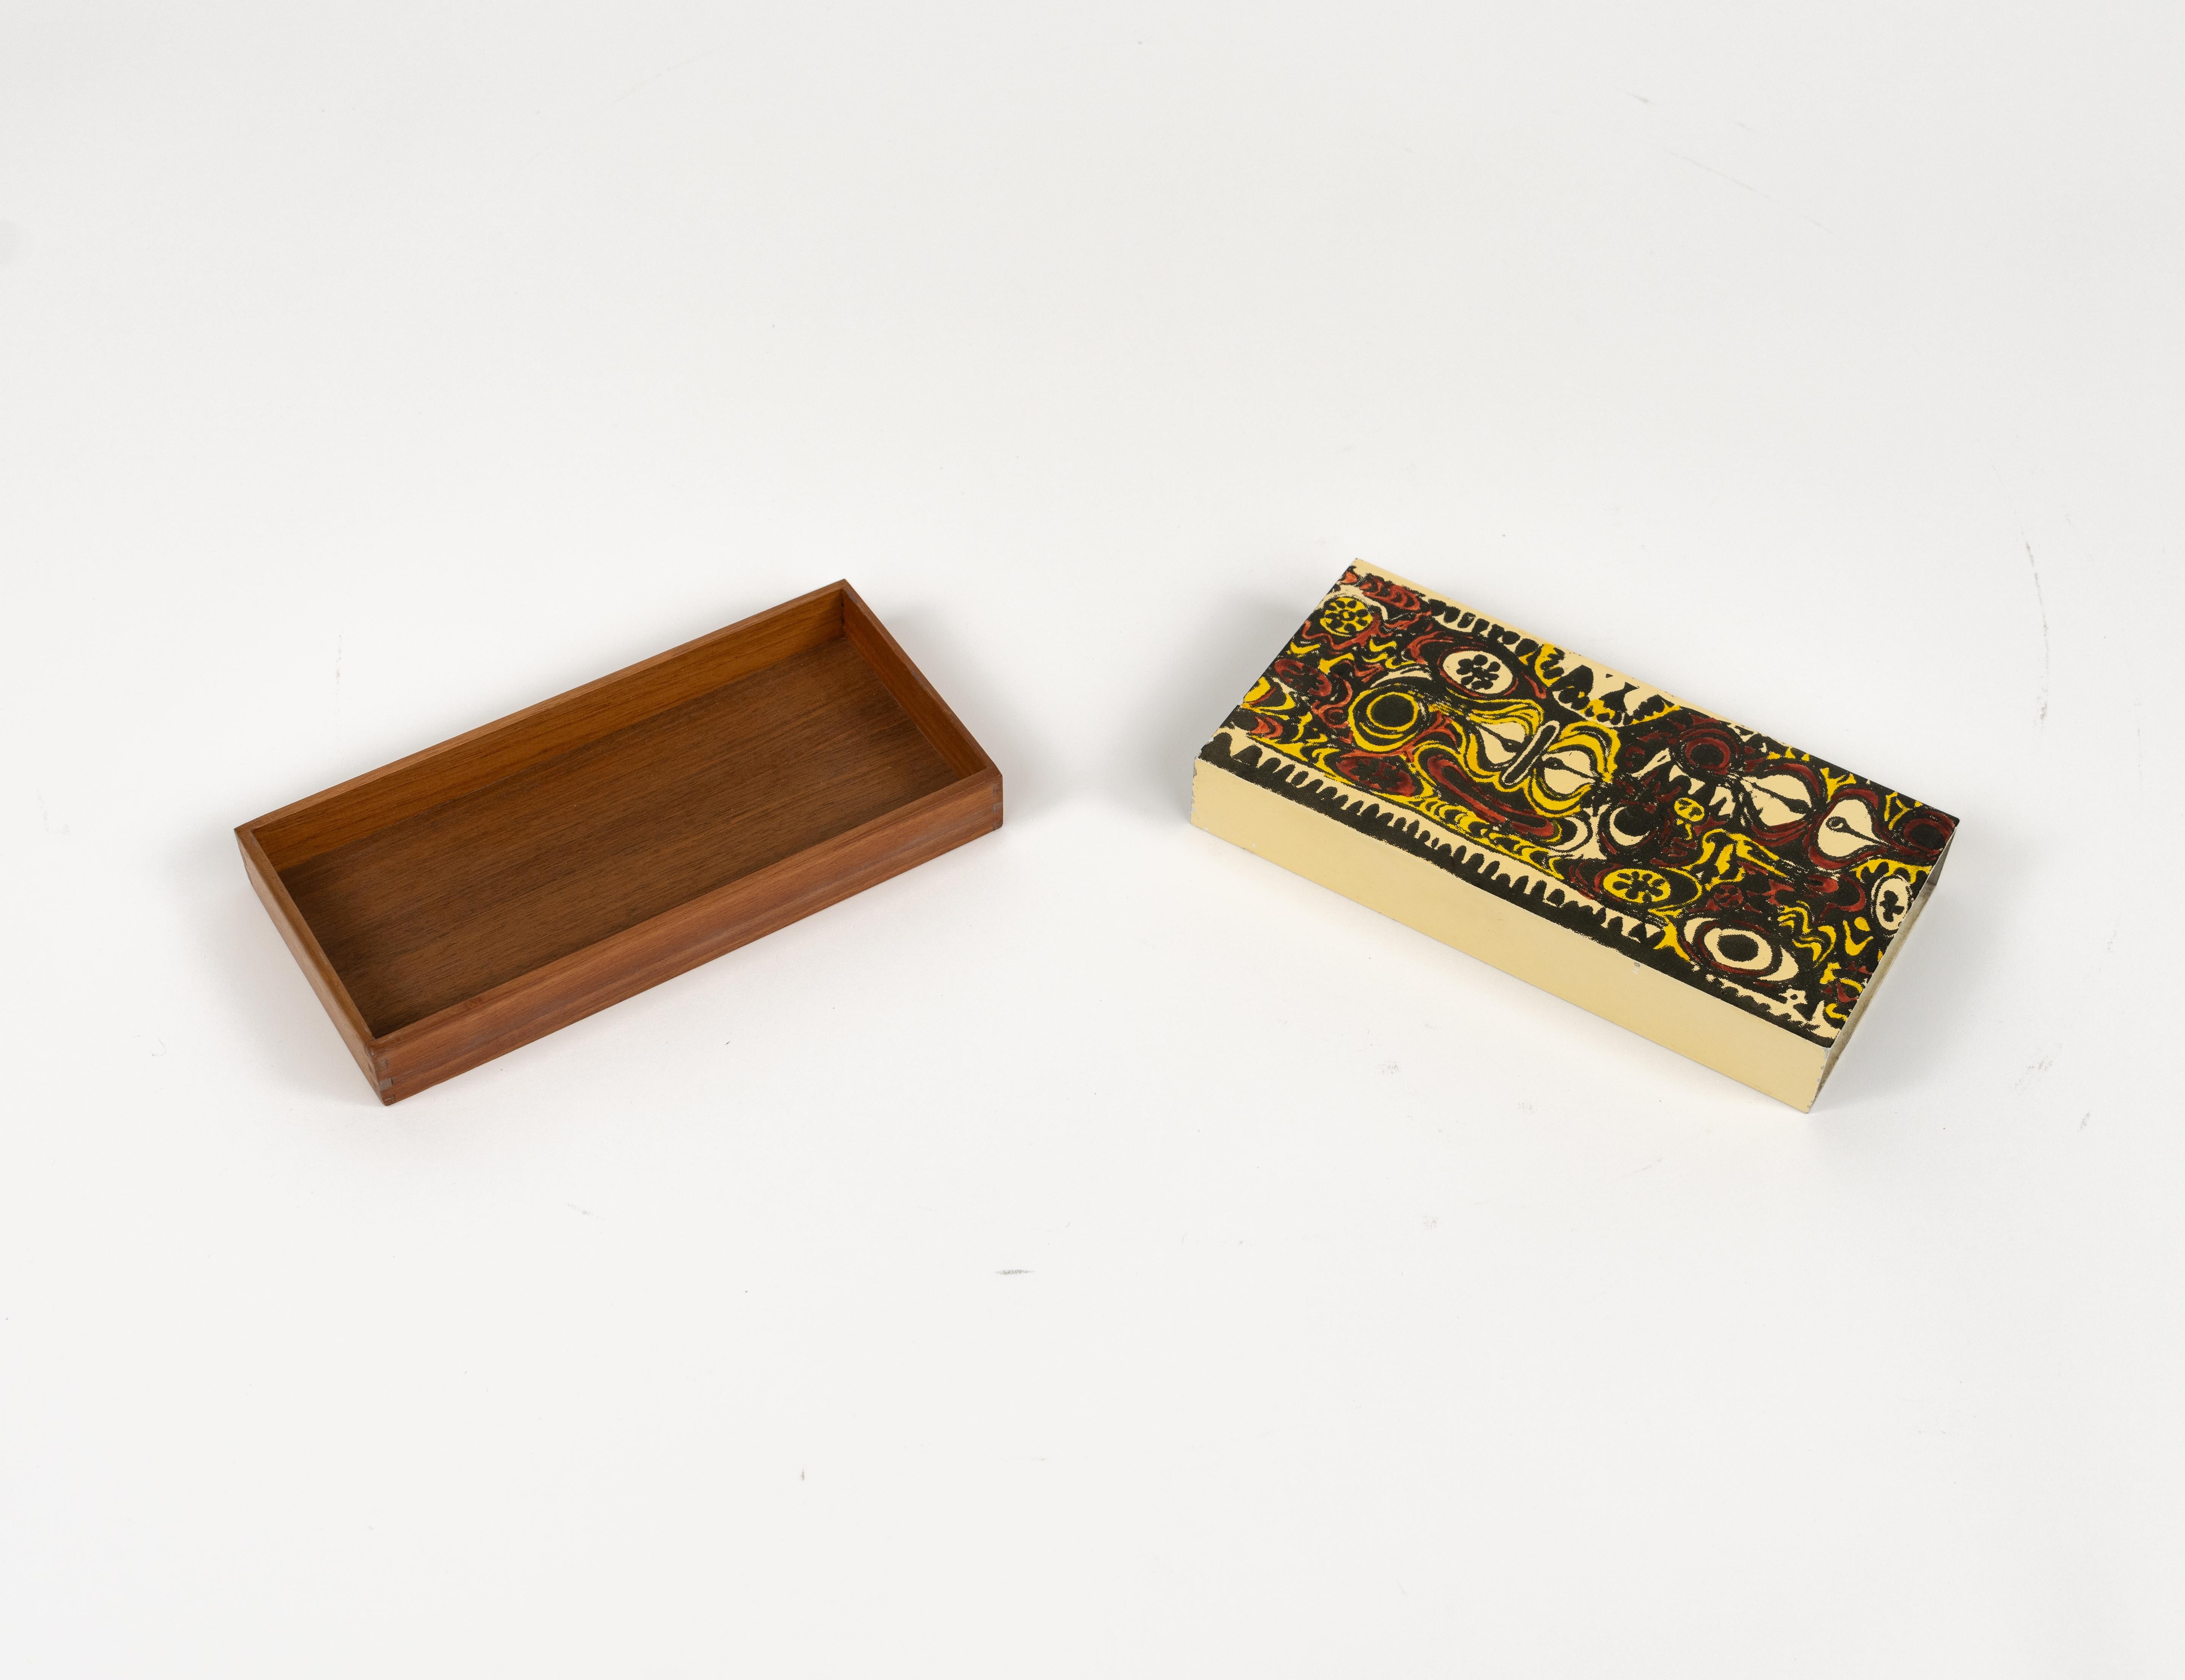 Mid-20th Century Midcentury Box in Enameled Metal and Wood Att. Piero Fornasetti, Italy 1960s For Sale